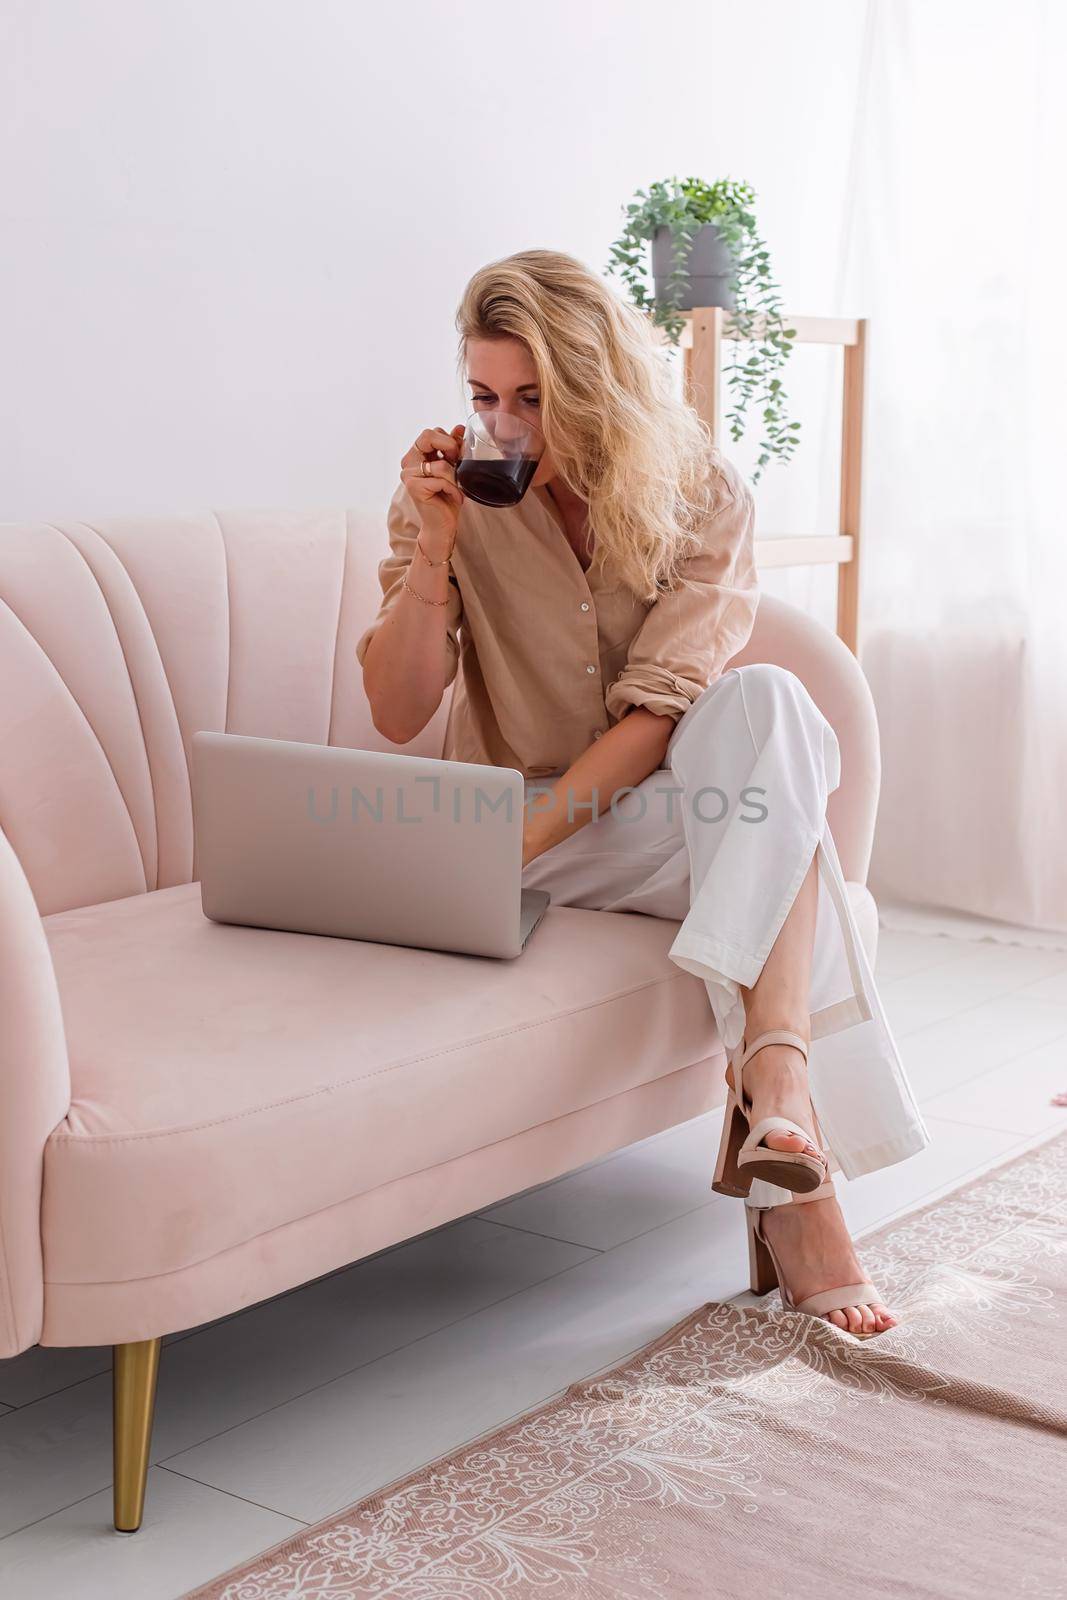 One stylish woman in light clothes sitting on light pink sofa, working on laptop, drink a cup of coffee. Vertical. Copy space